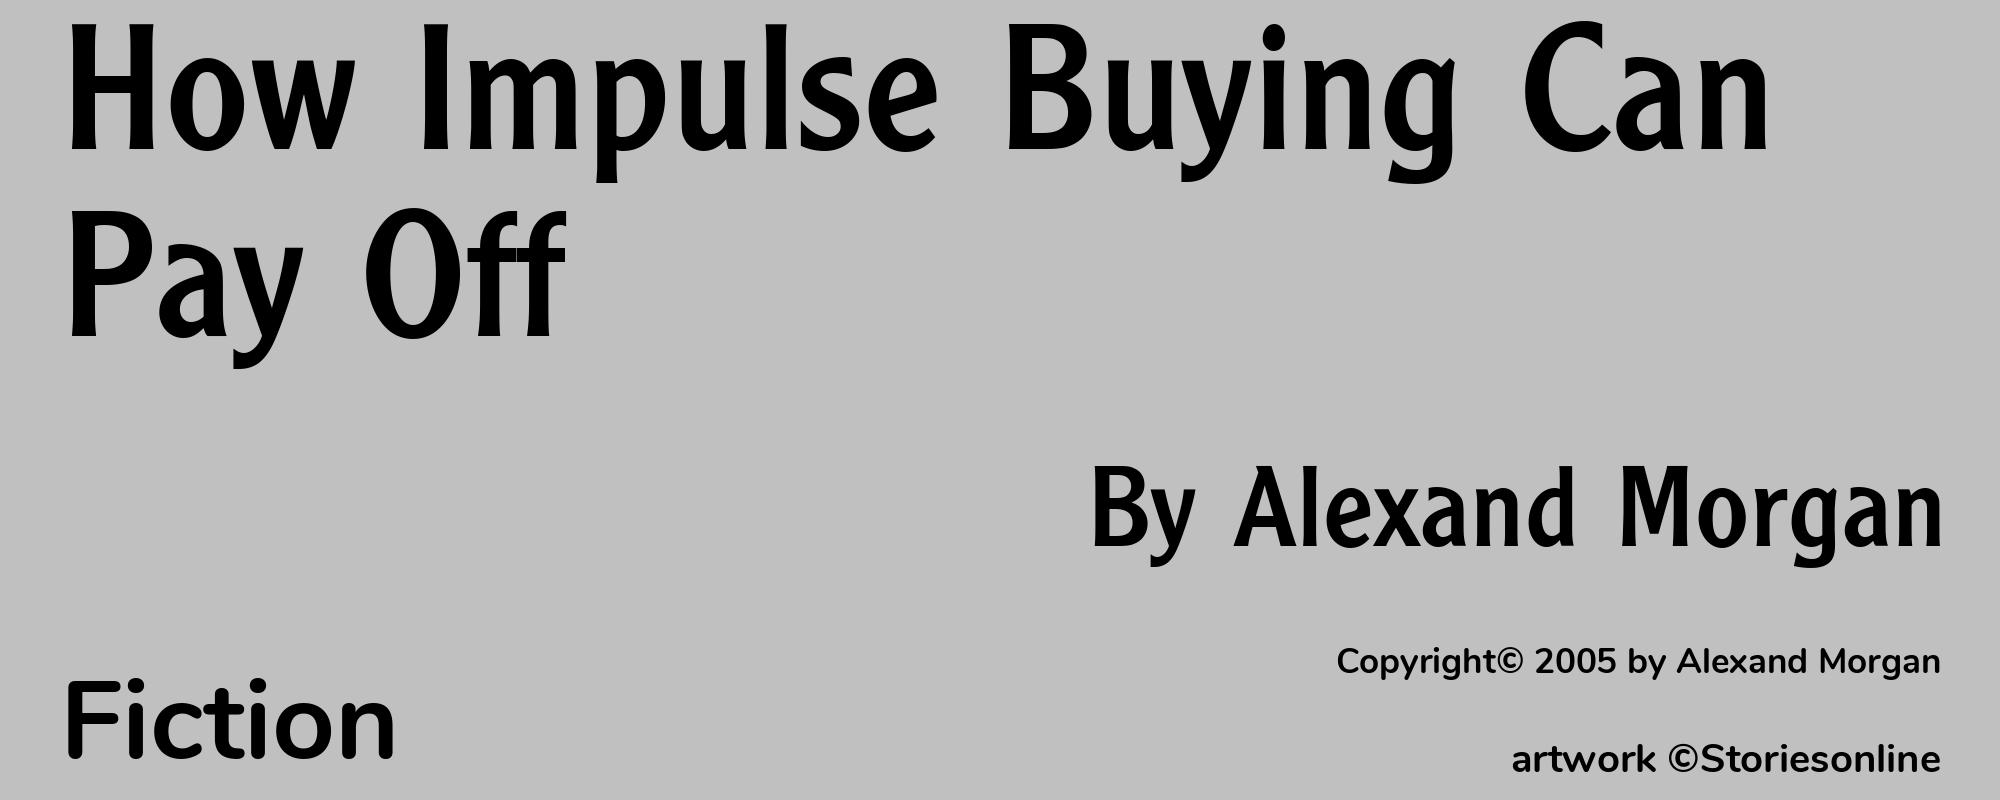 How Impulse Buying Can Pay Off - Cover